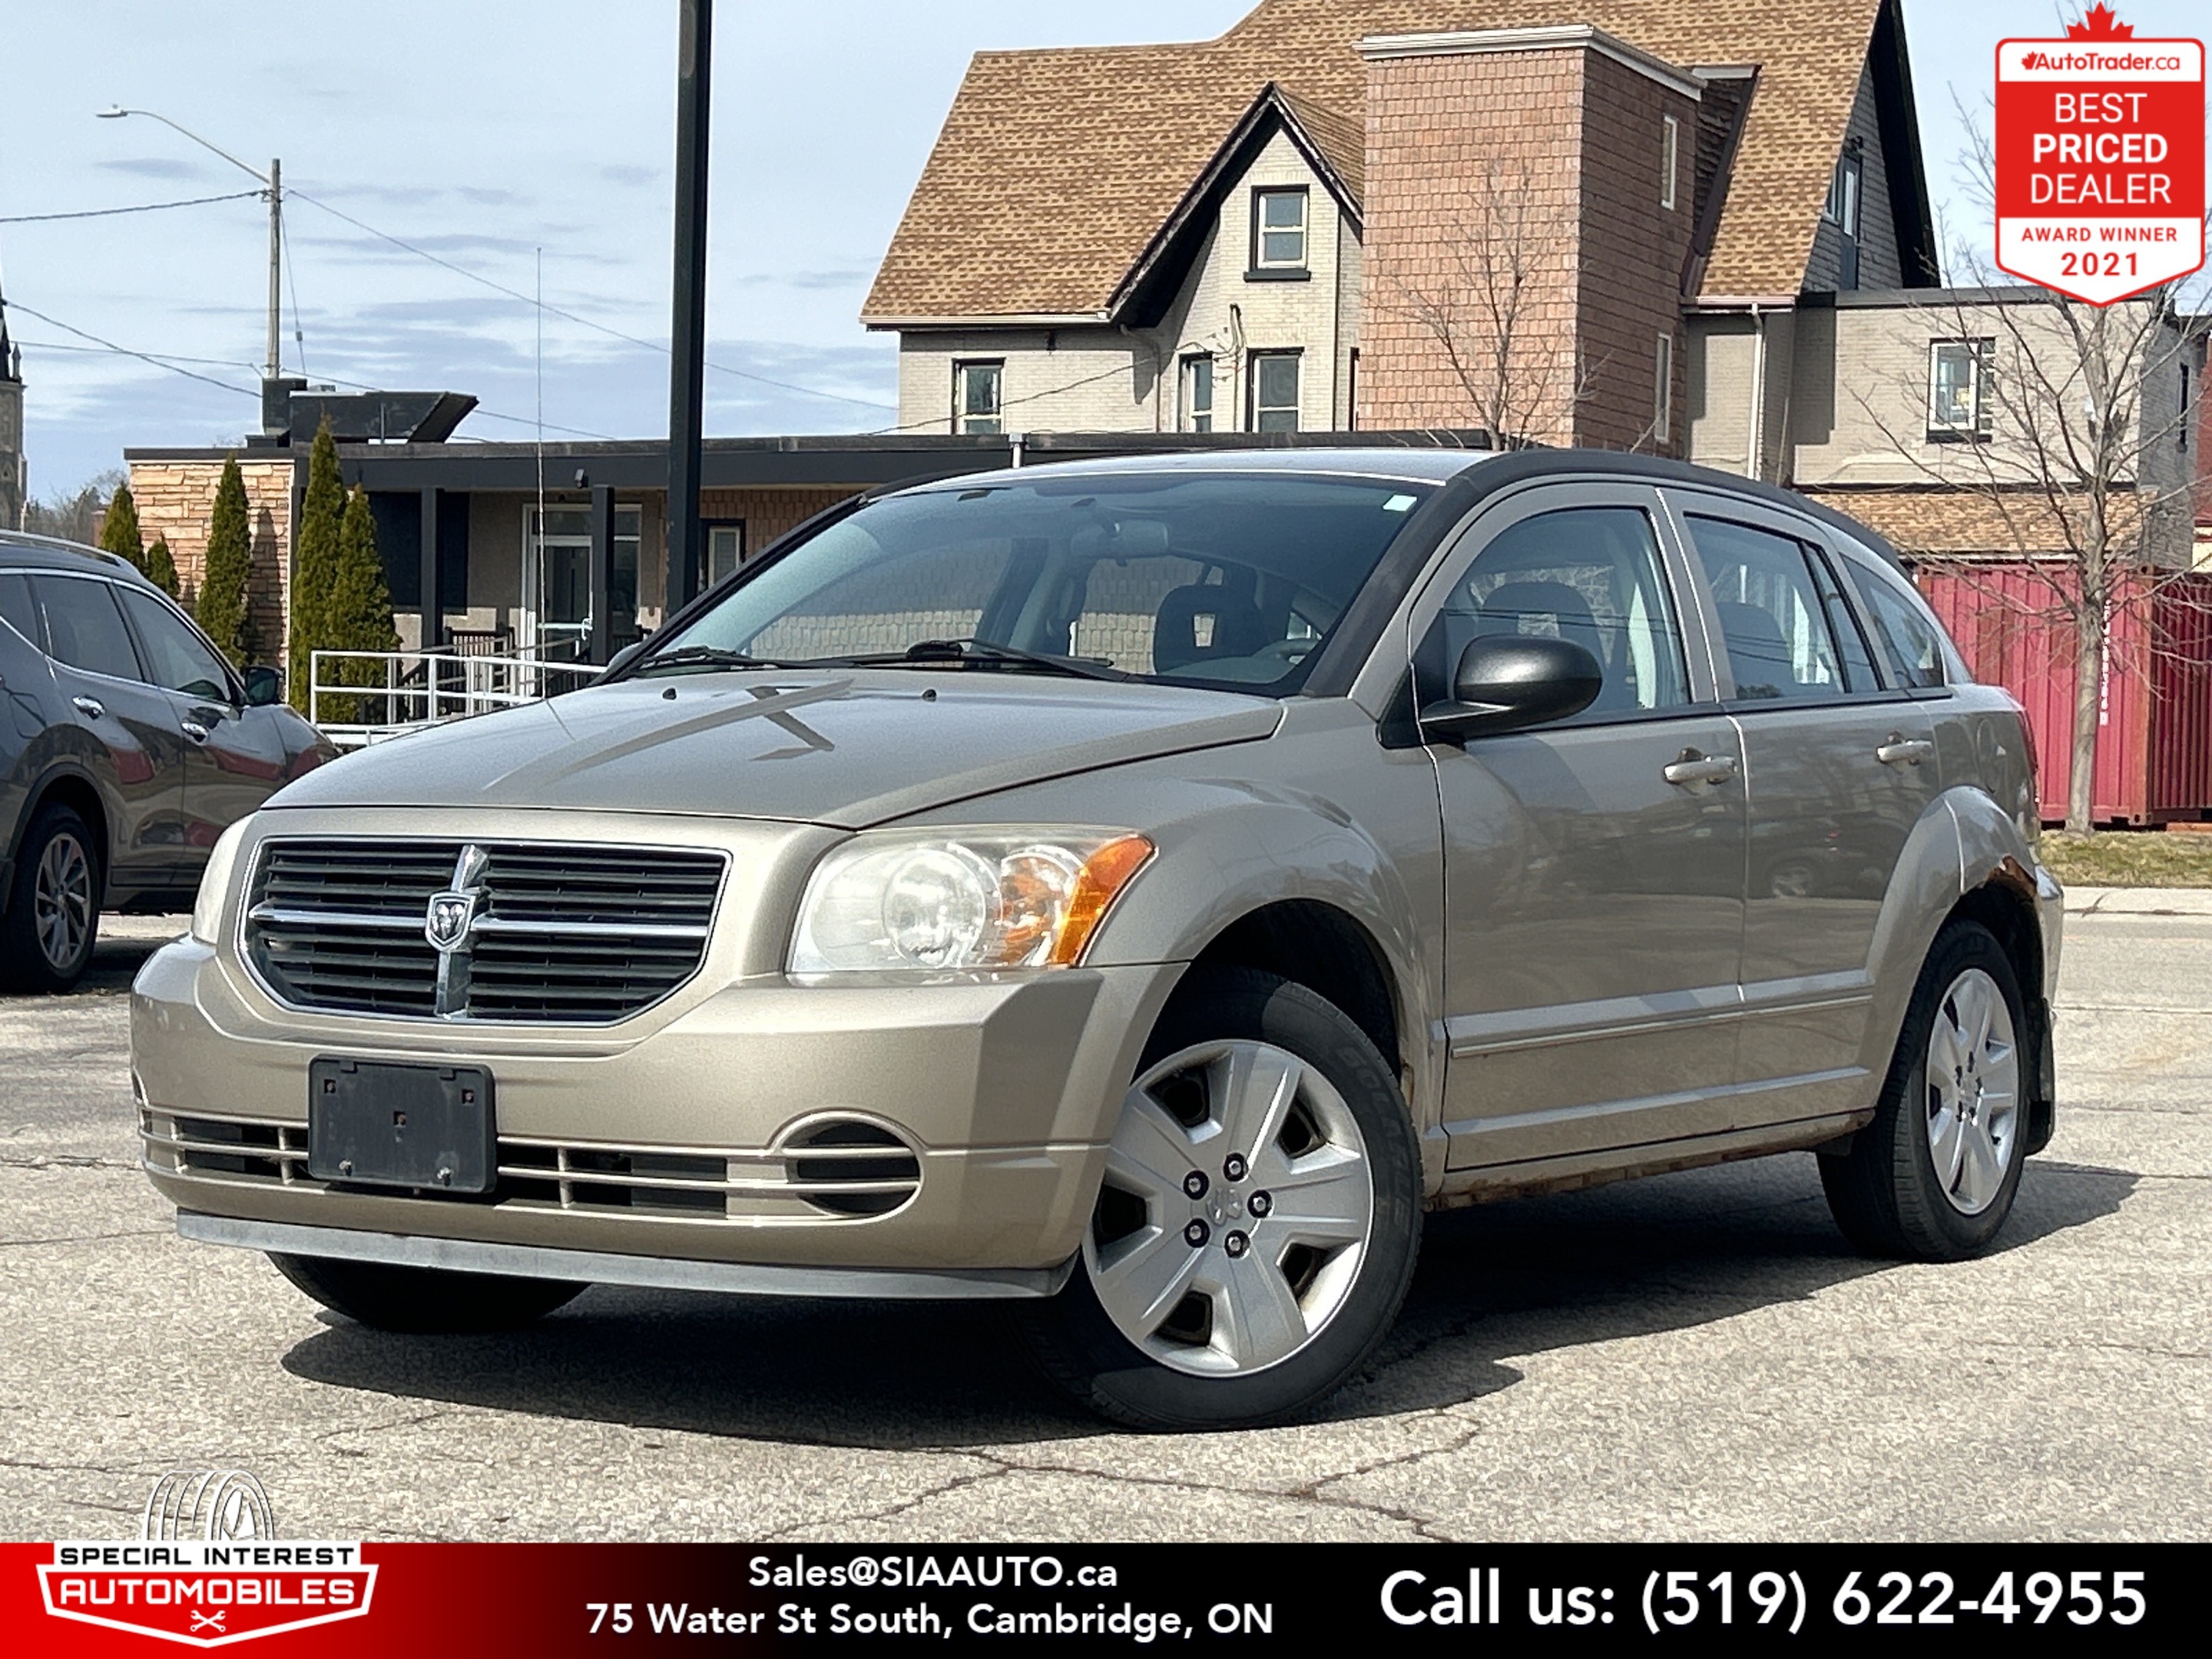 2009 Dodge Caliber 4dr HB SXT * Accident Free * AS-IS